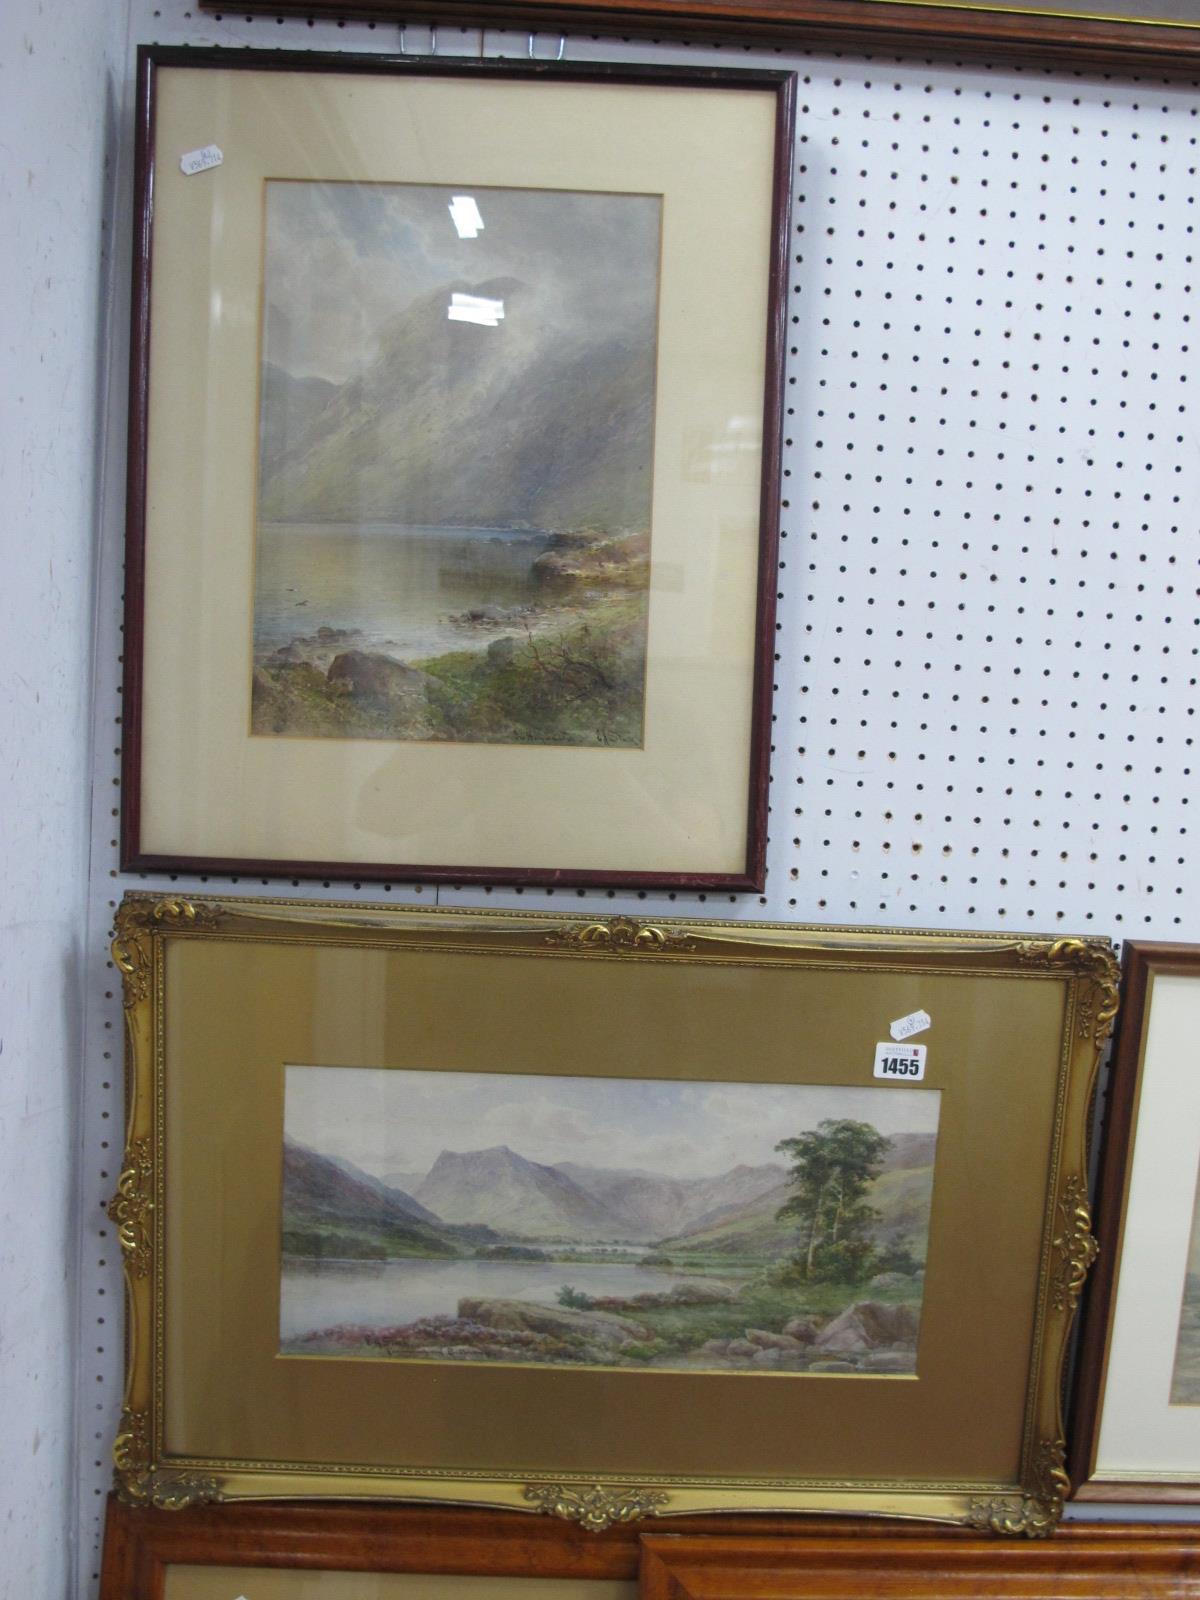 E.A Stock, 'Crummack and Bullamere' watercolour, signed and titled lower left, 19 x 40cm, another on